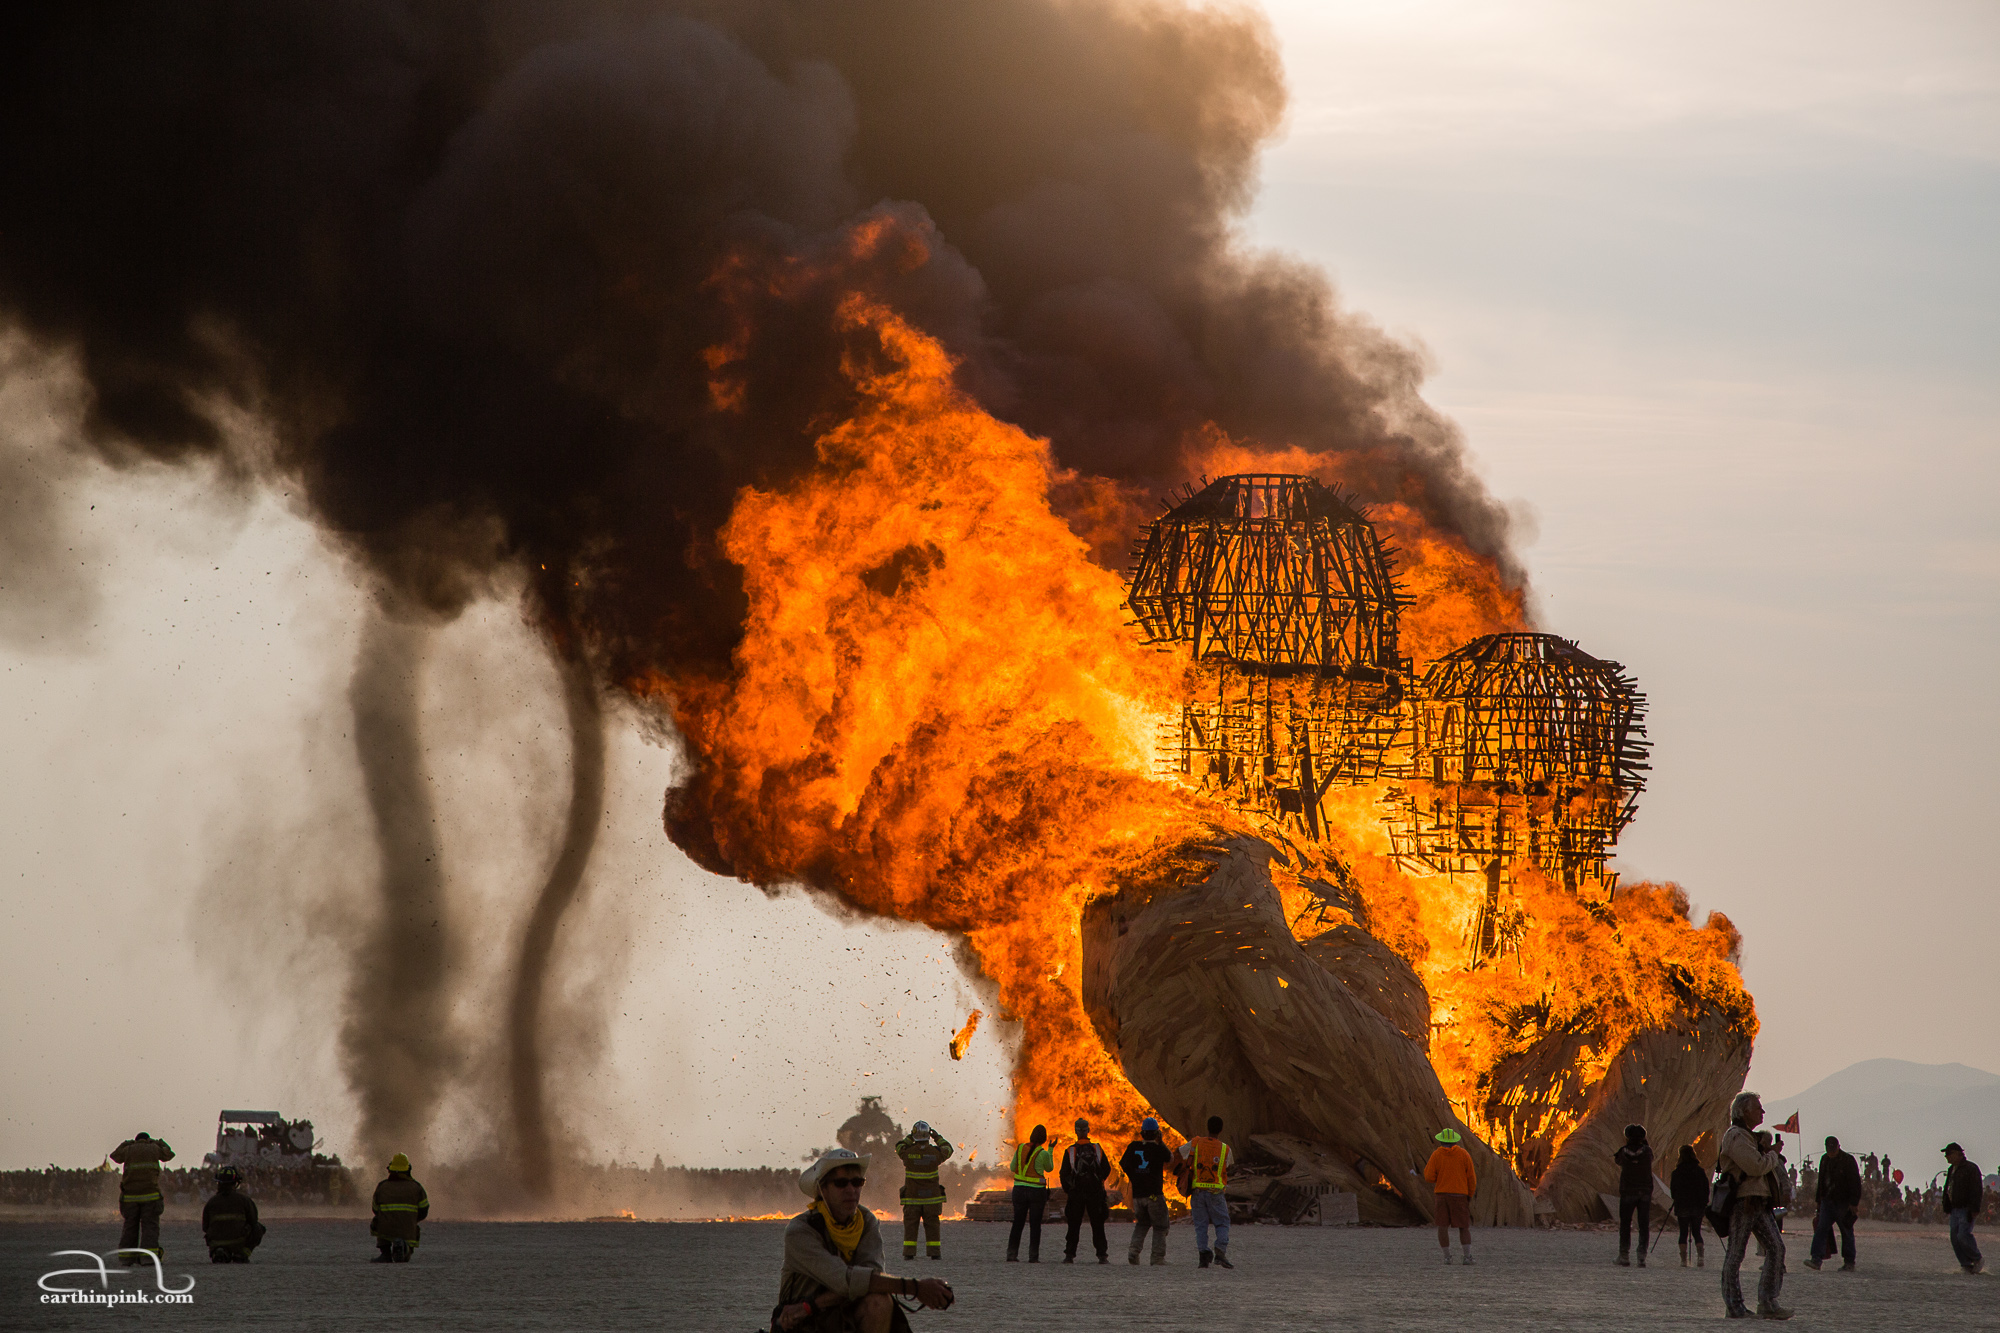 While most of the artwork is traditionally burned at night during this festival, the 70-foot wooden sculpture entitled 'Embrace' was set ablaze just after sunrise revealing the thick billowing smoke and many successive dust devils that could not have been seen otherwise in the dark.